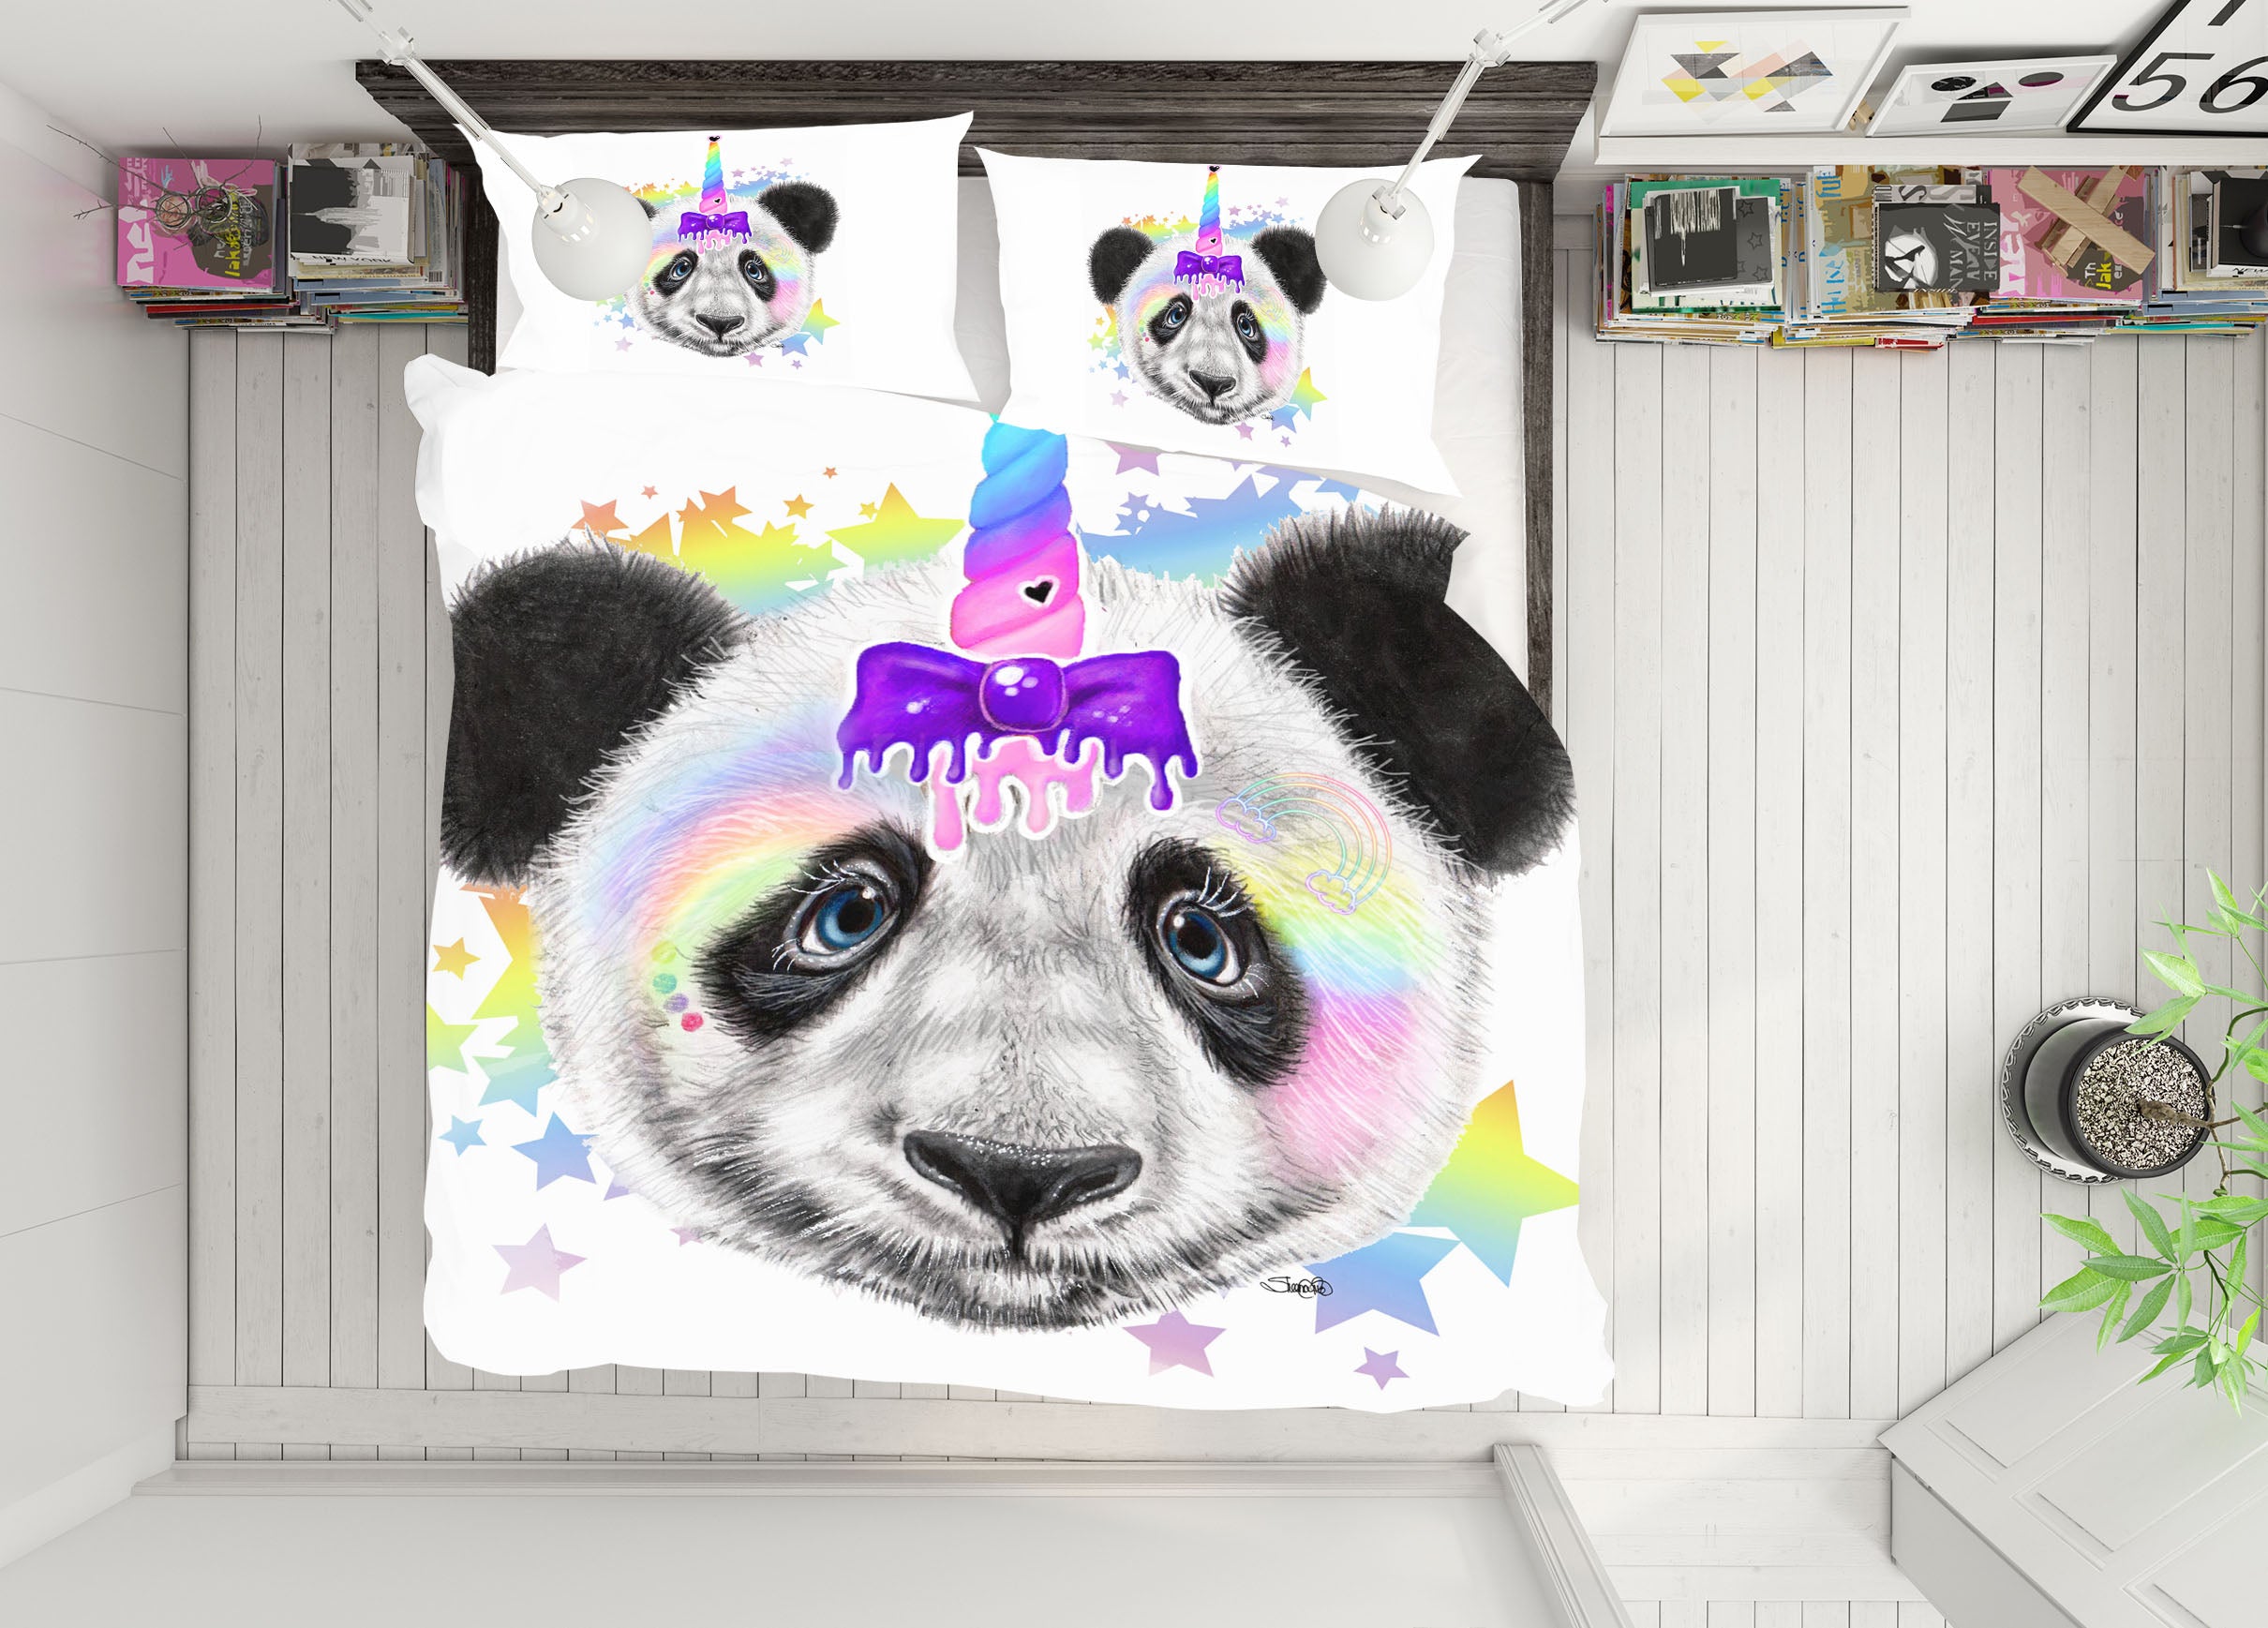 3D Color Star Panda 8583 Sheena Pike Bedding Bed Pillowcases Quilt Cover Duvet Cover